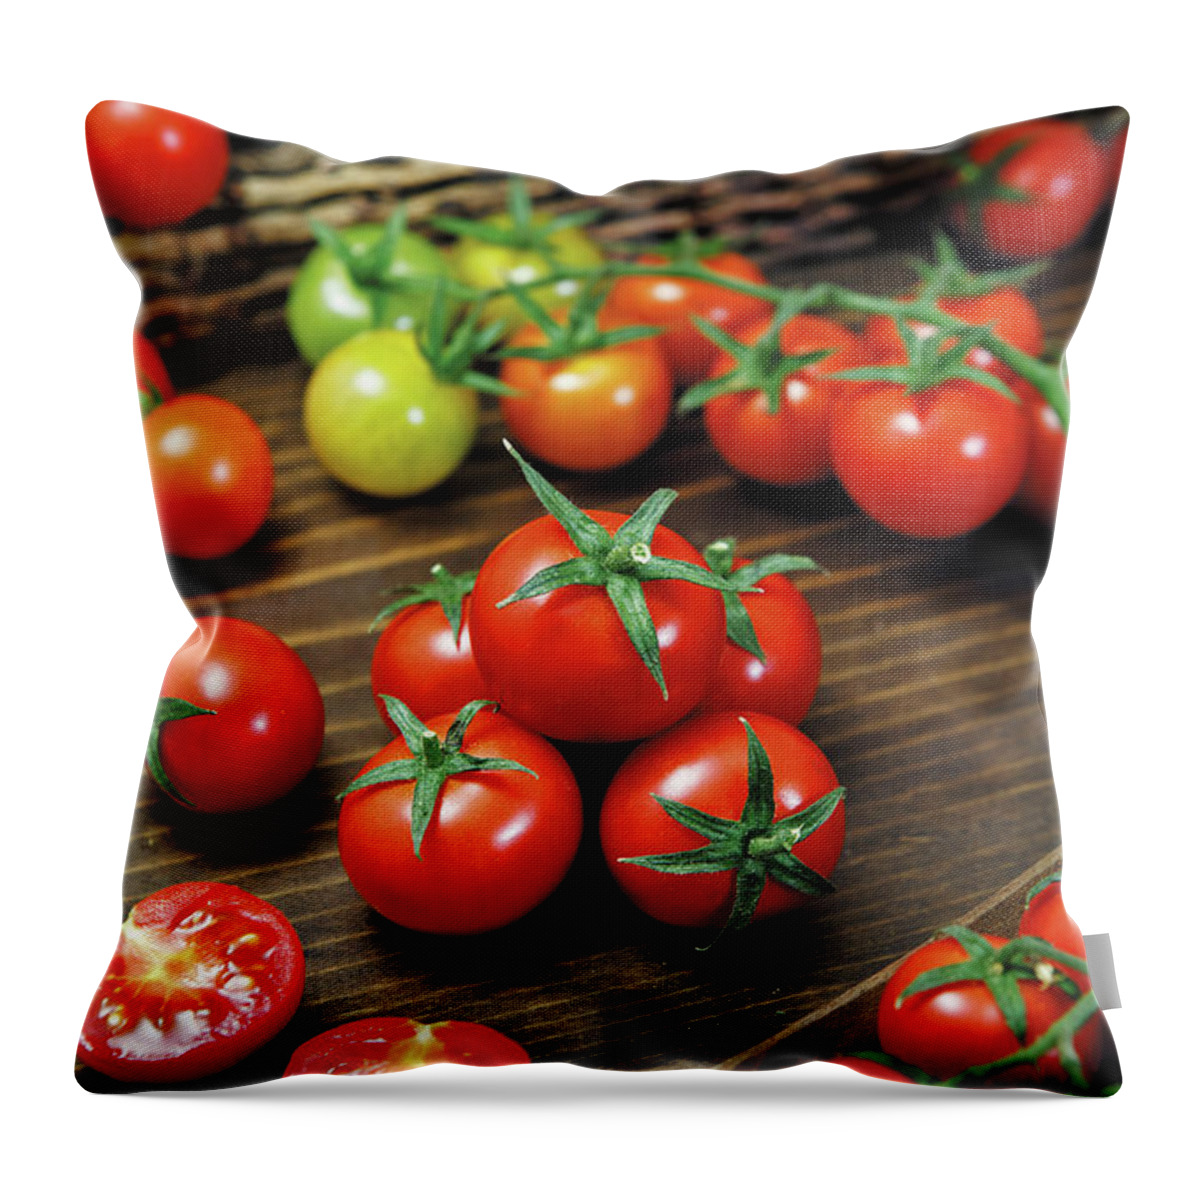 Large Group Of Objects Throw Pillow featuring the photograph Tomato by By Jbfotoblog